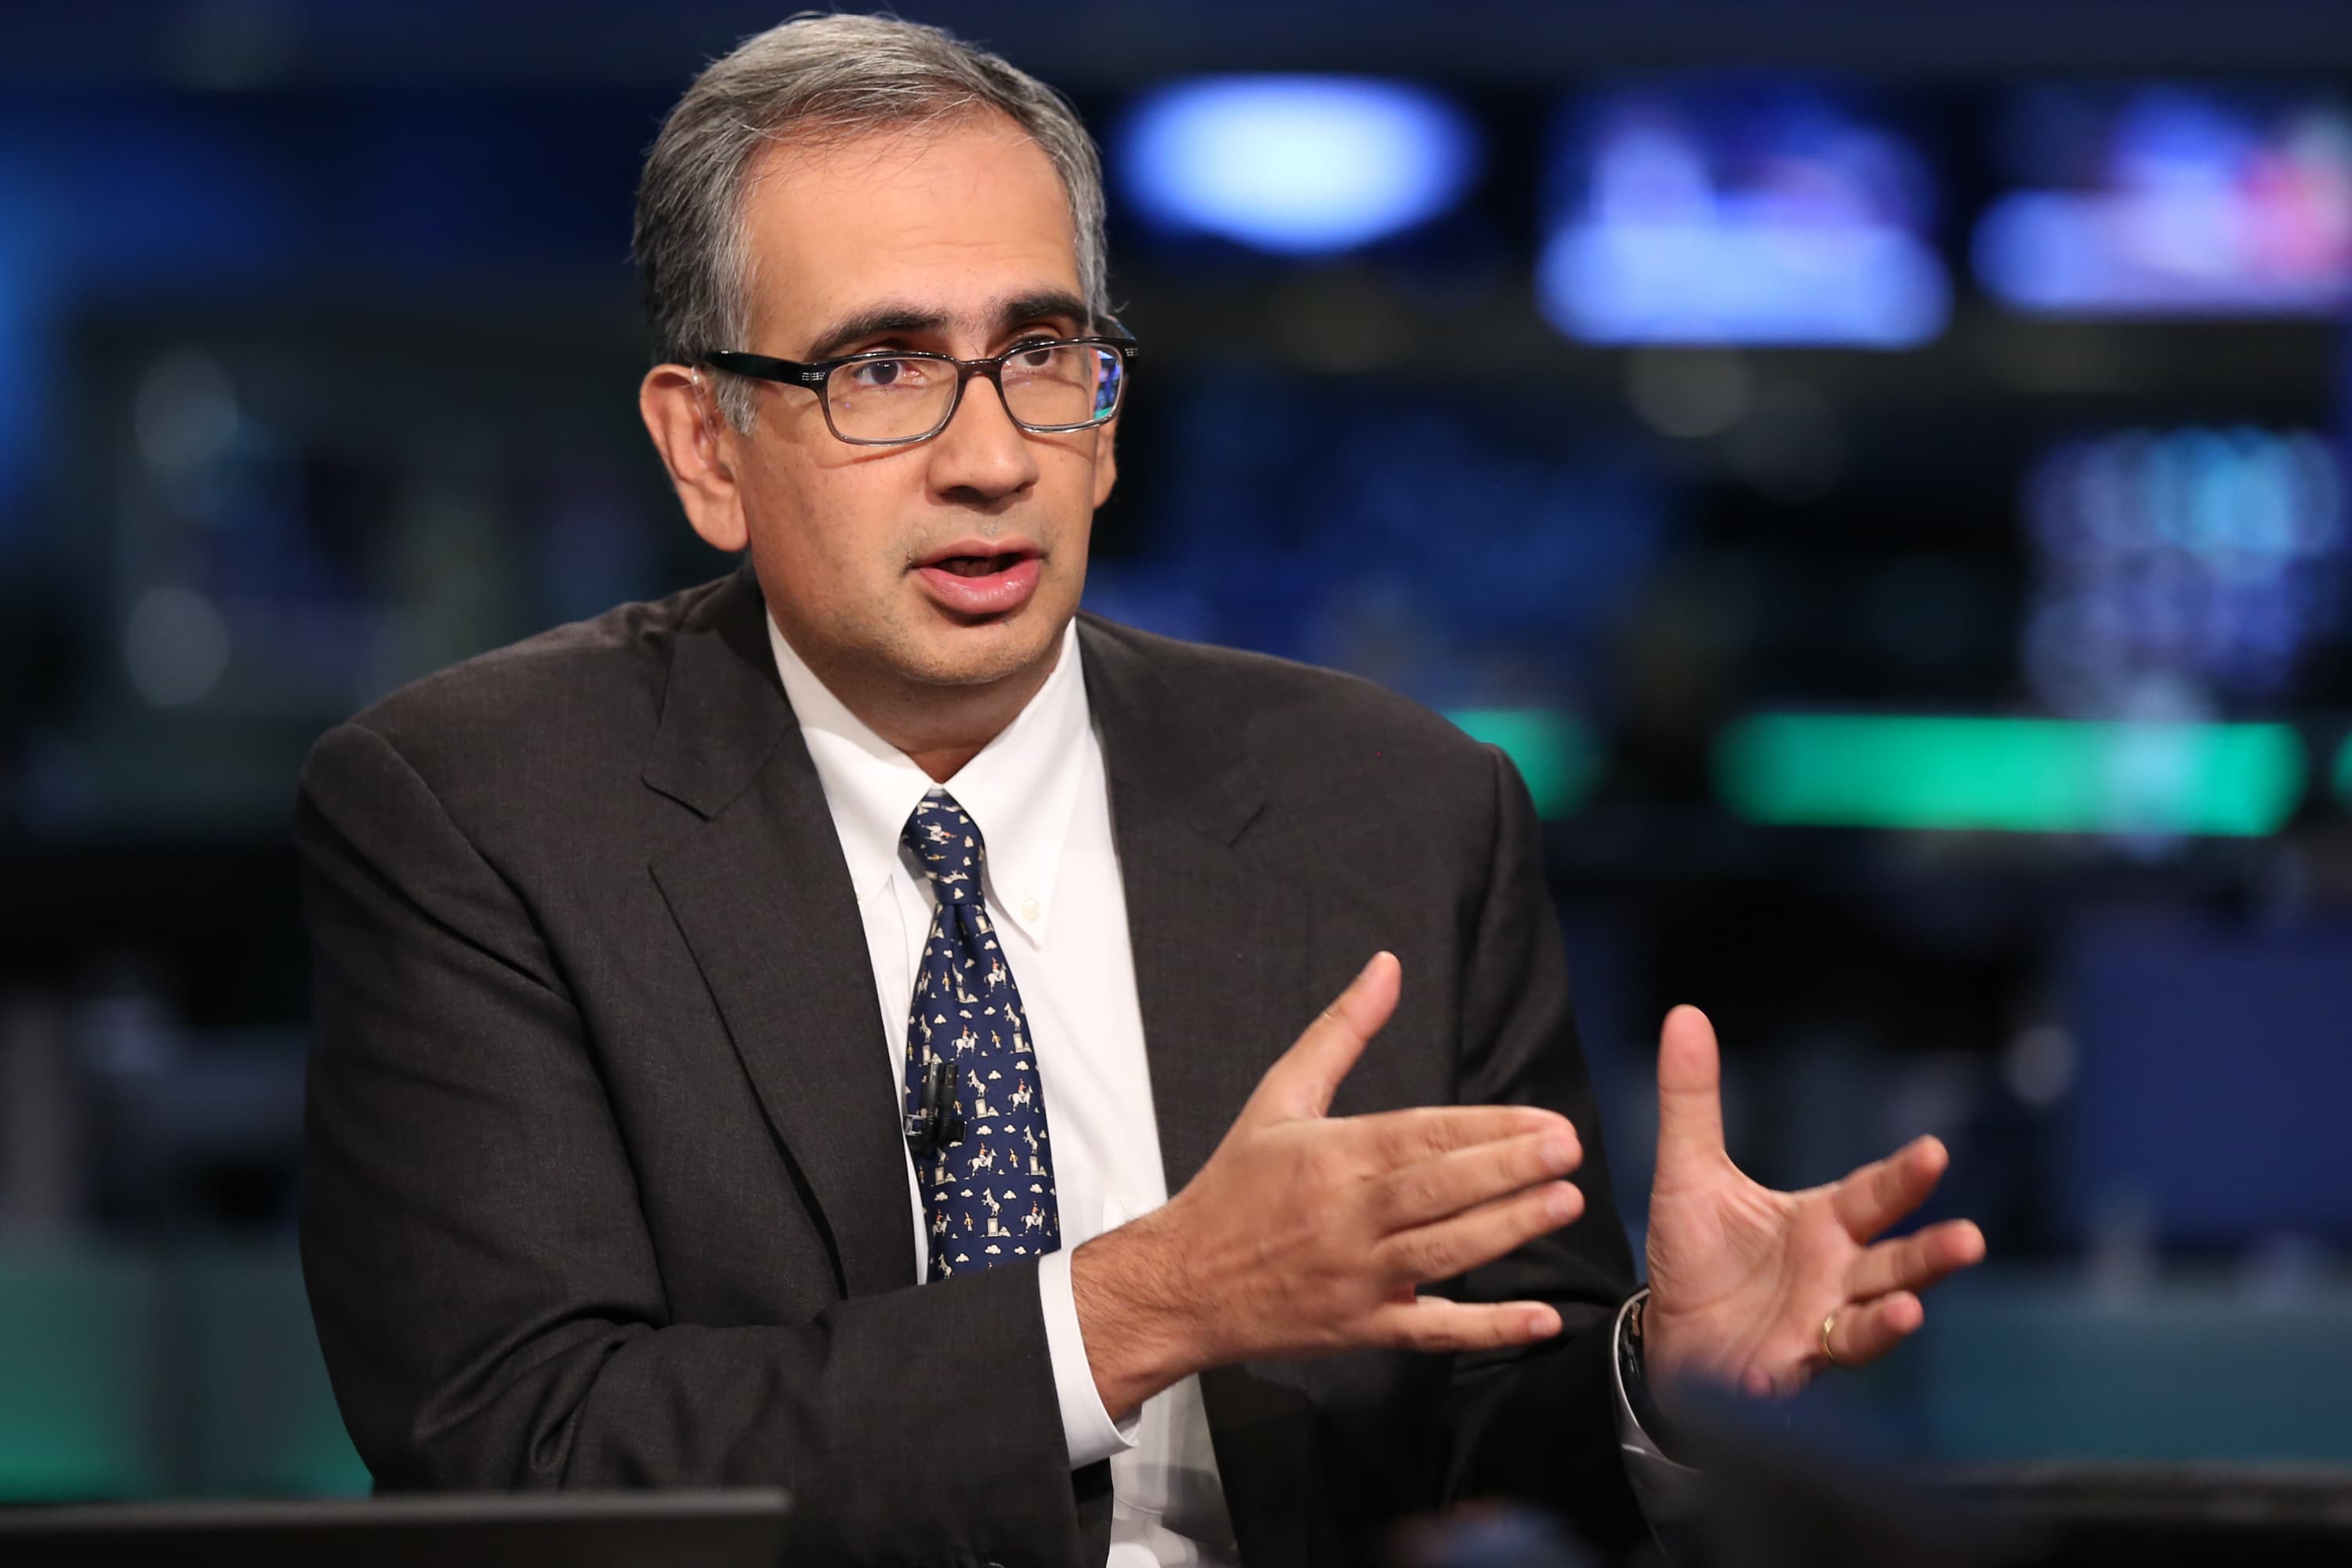 Here's why Sarat Sethi isn't selling energy stocks even as oil prices fall